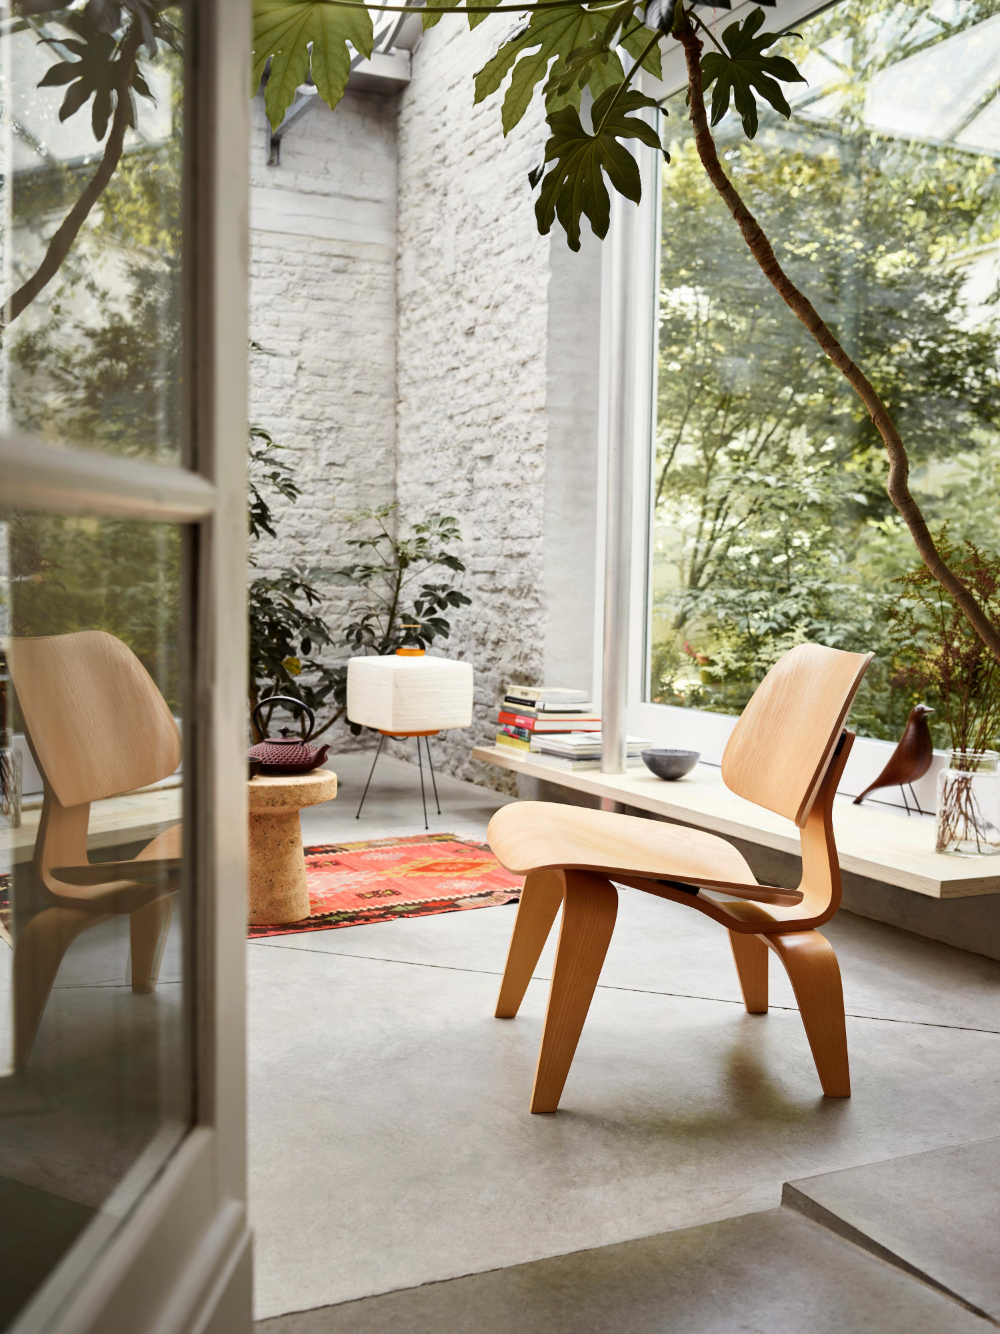 Iconic Design: Add Elegance with Eames Chairs